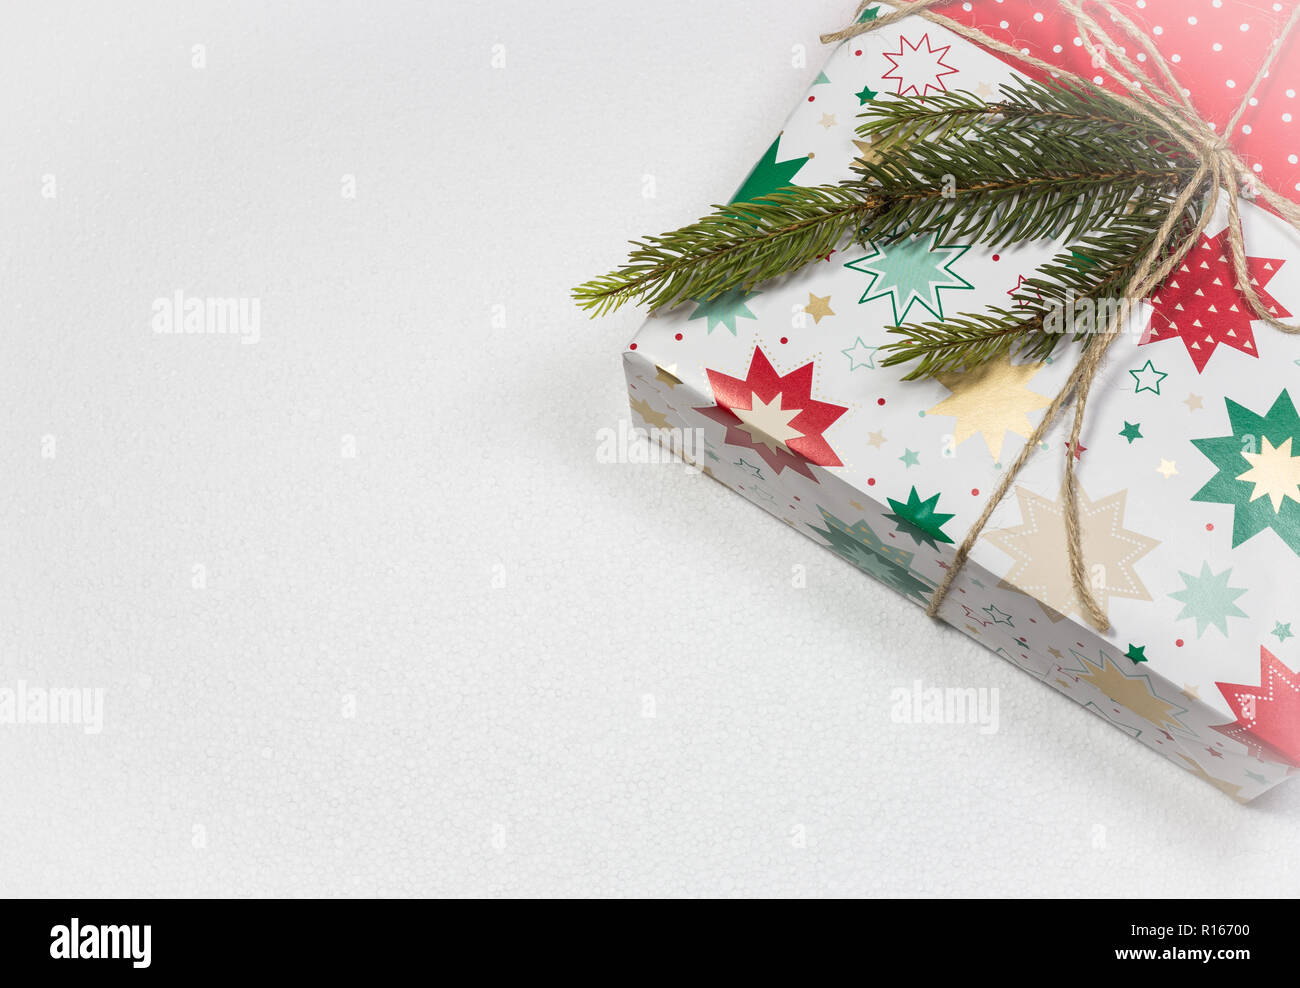 Gift box and fir tree isolated on white background. Top view with copy space. Christmas and New Year holidays background Stock Photo